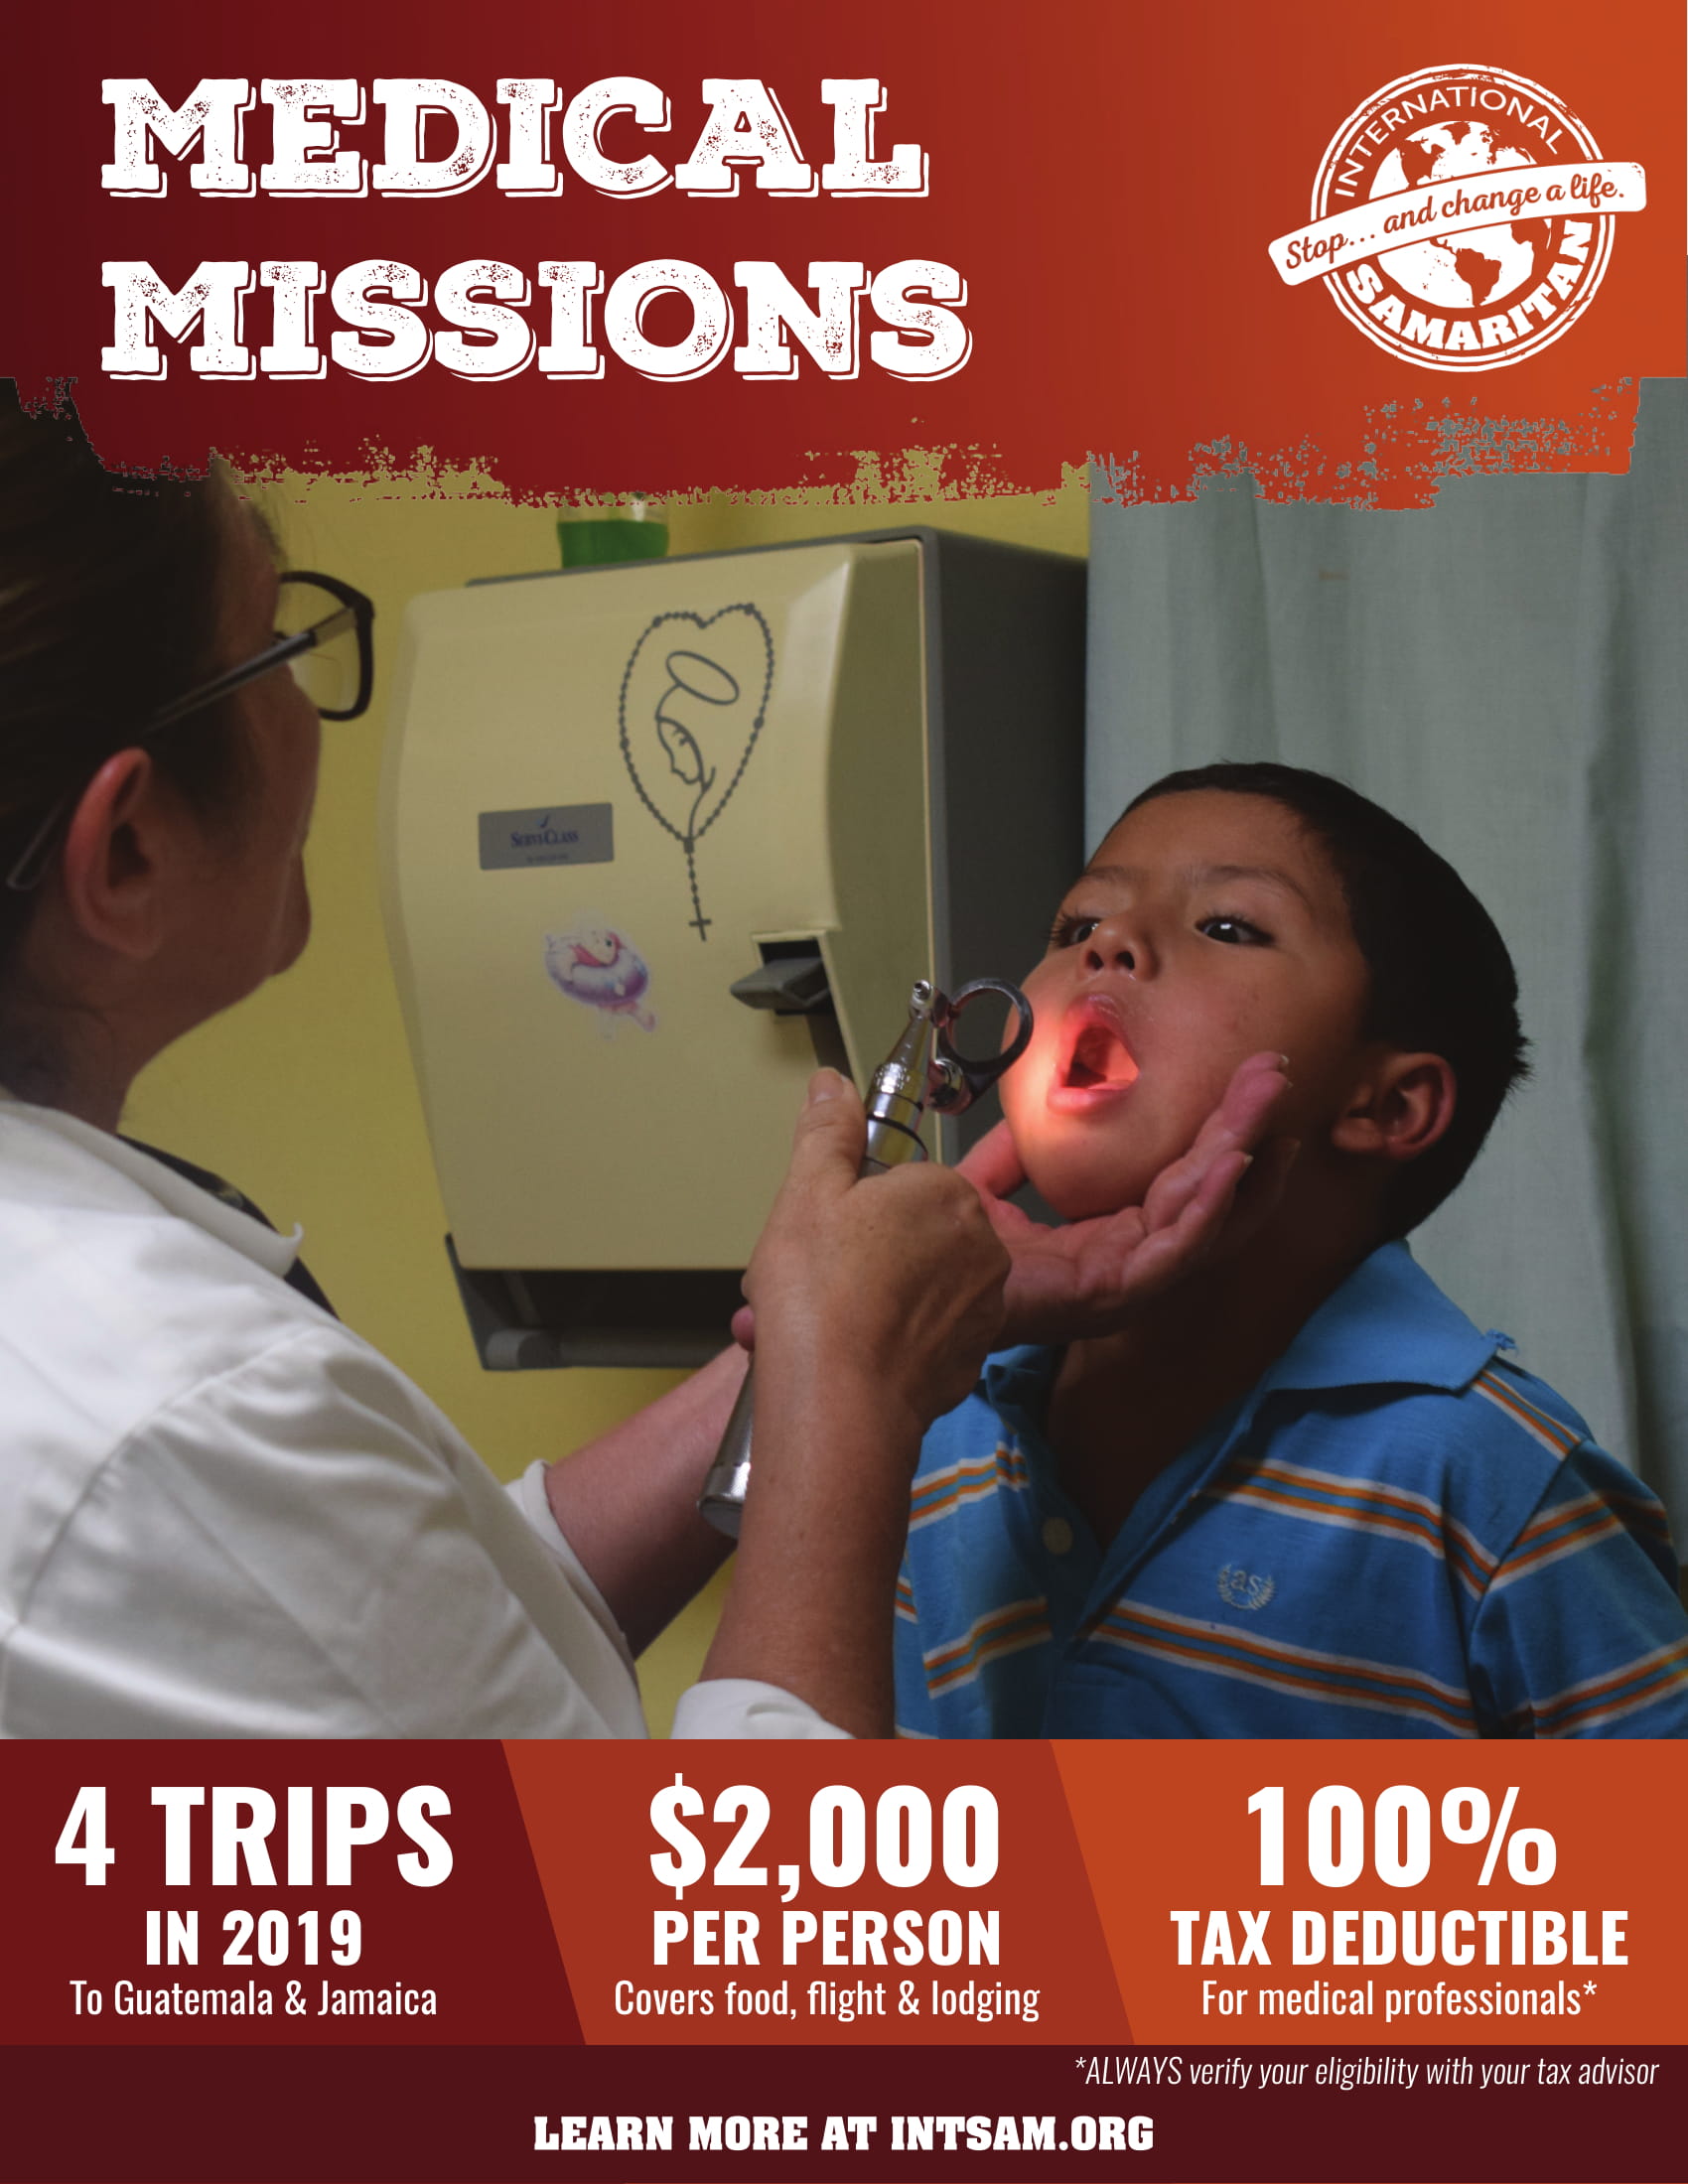 medical mission trip meaning